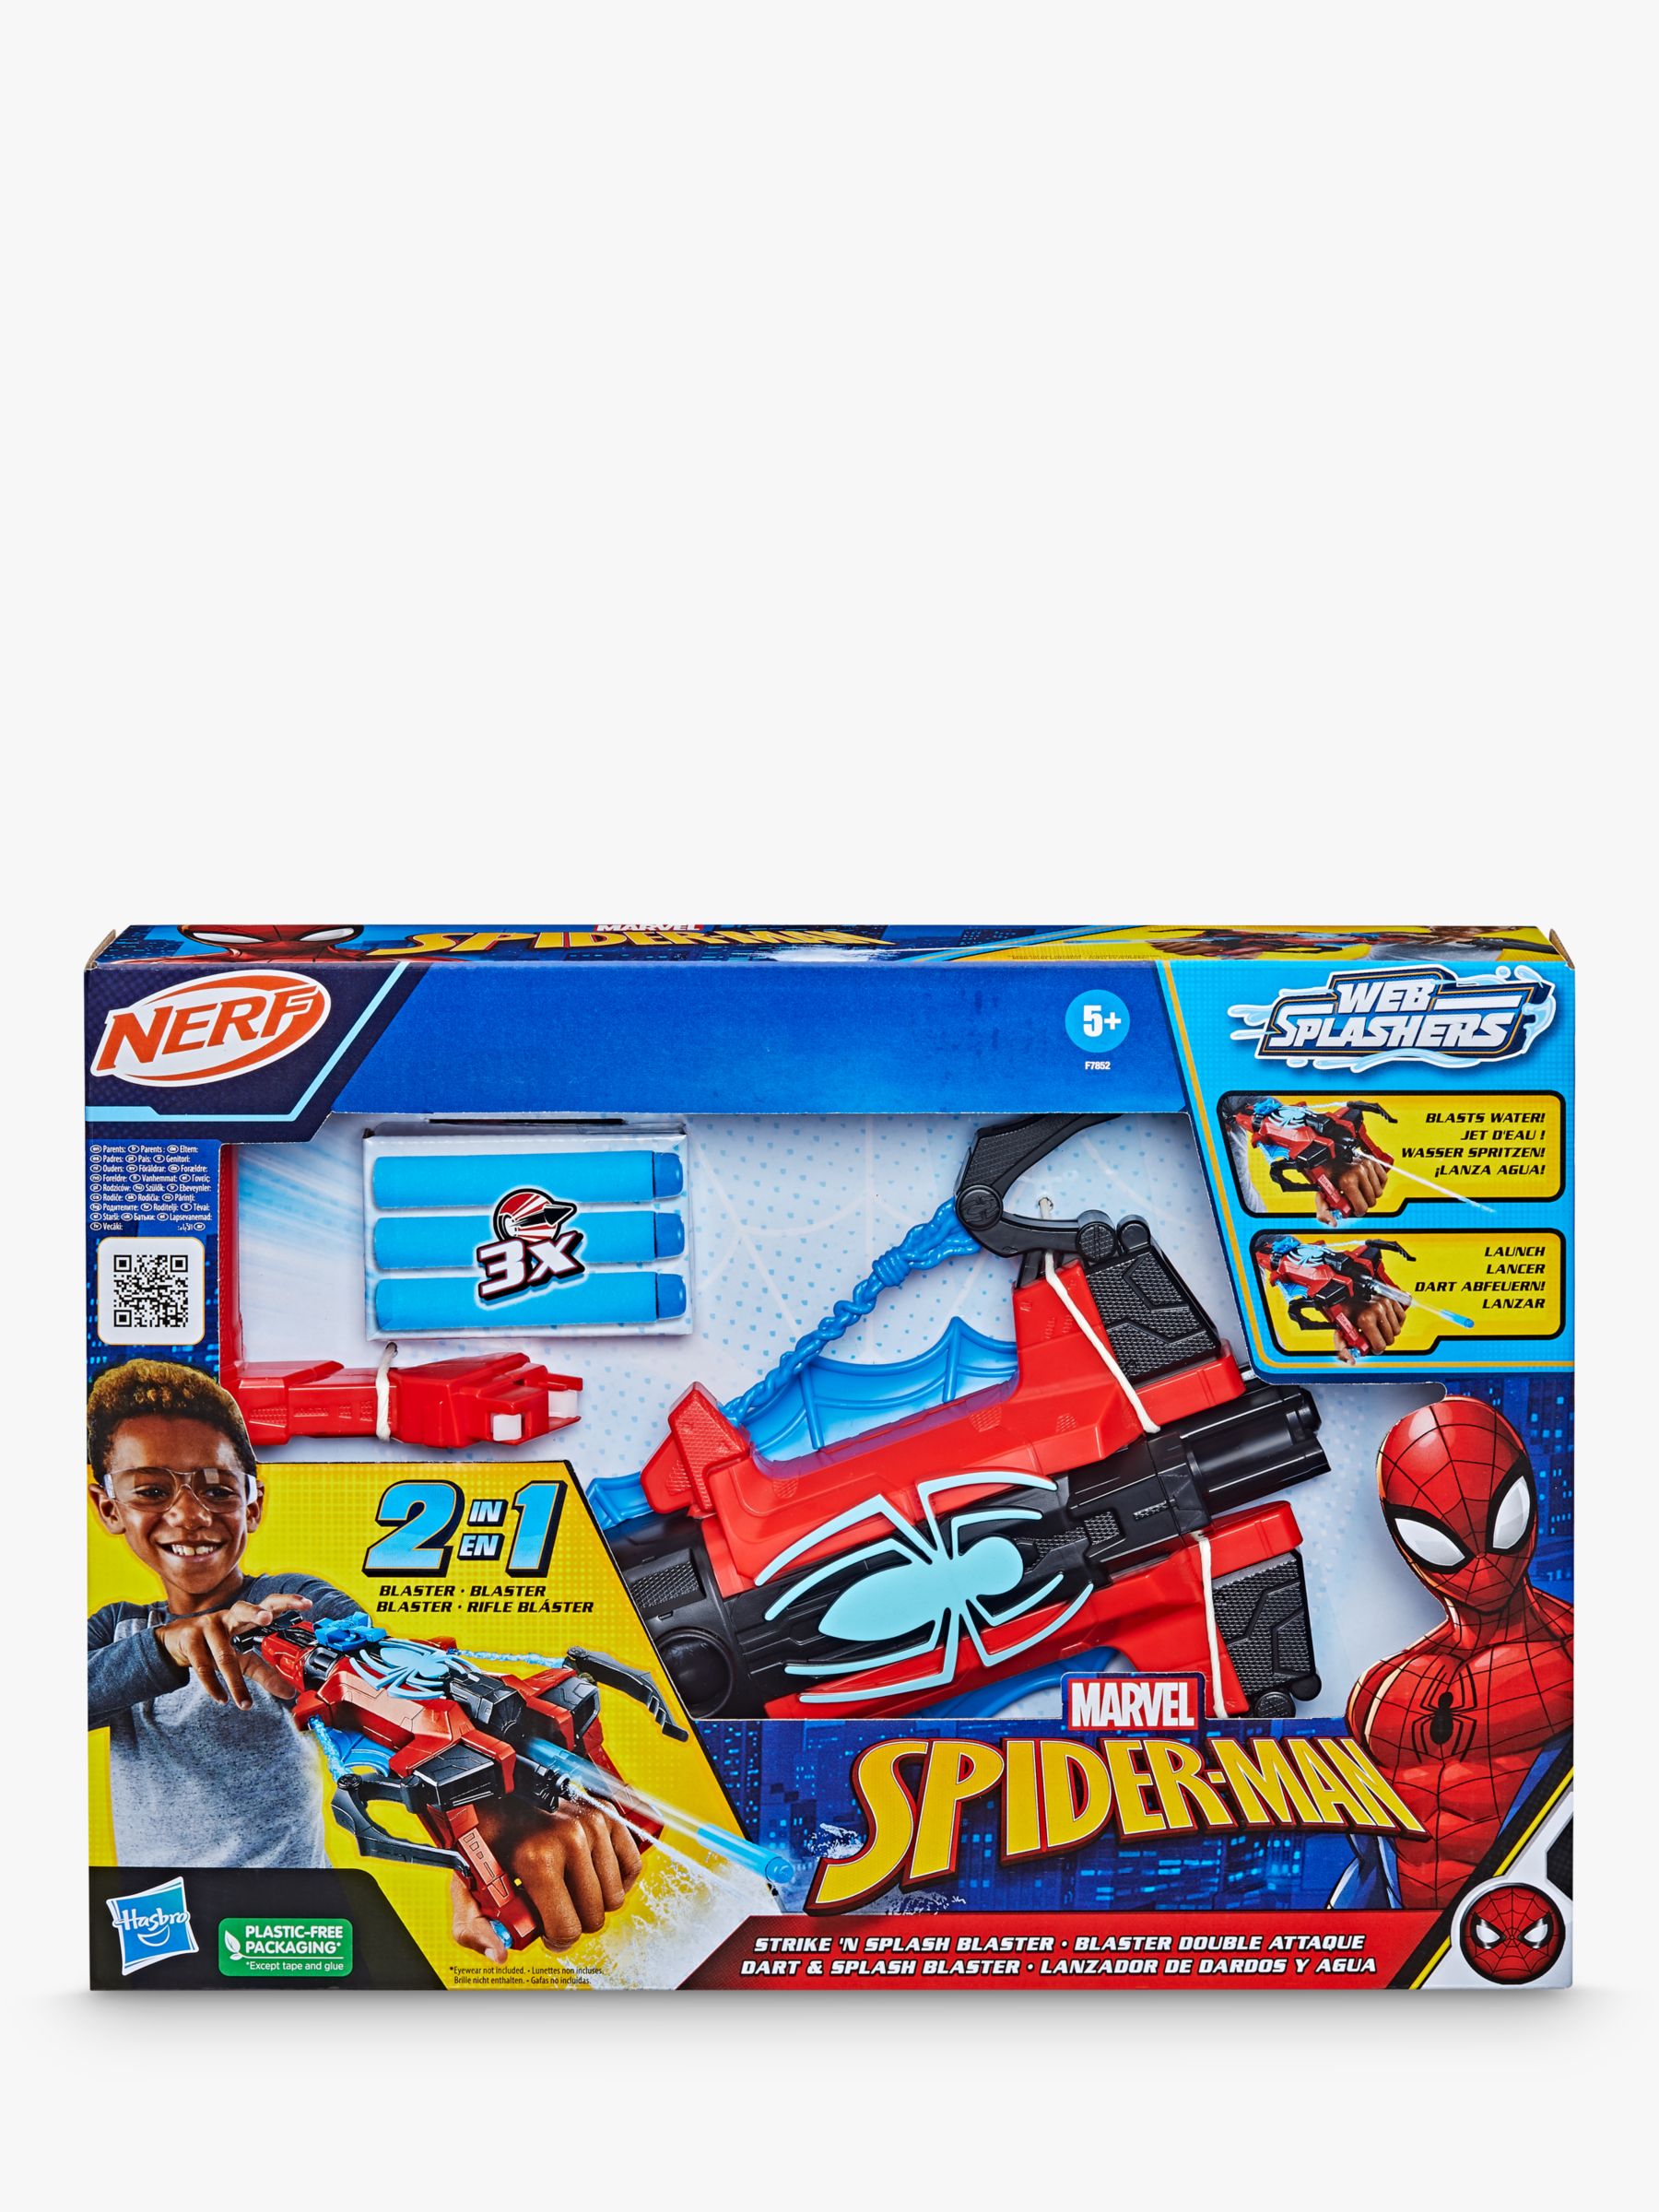 Spider-Man Web Shots Spiderbolt Nerf Powered Blaster Toy for Kids Ages 5 &  Up includes blaster, 3 darts, and instructions